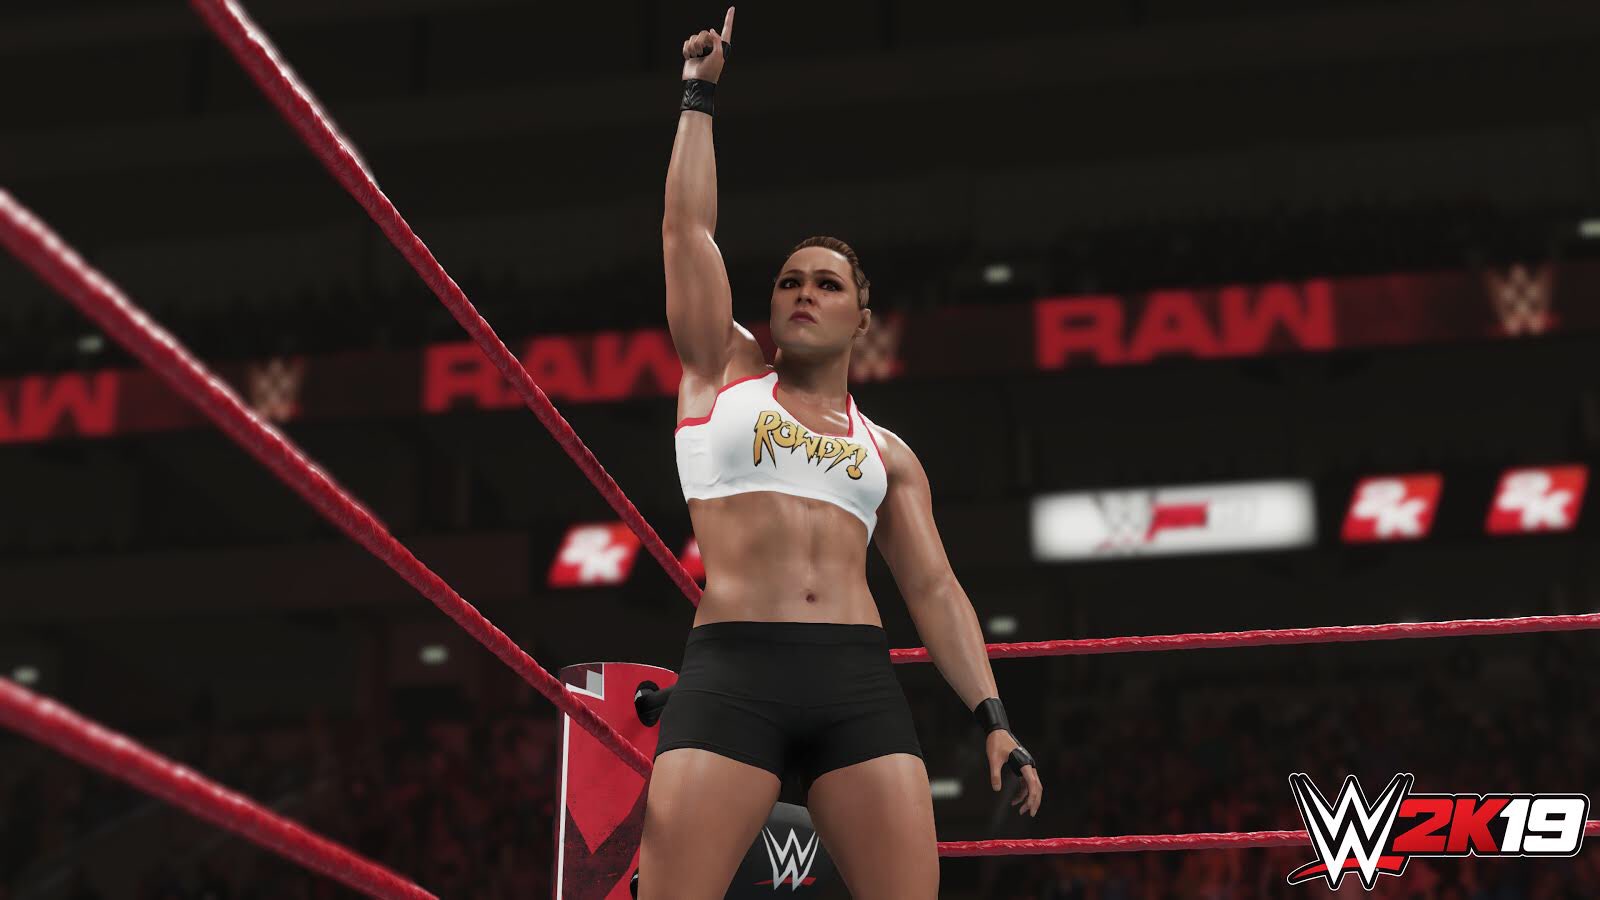 Another New WWE 2K19 Screenshot Shows Ronda Rousey